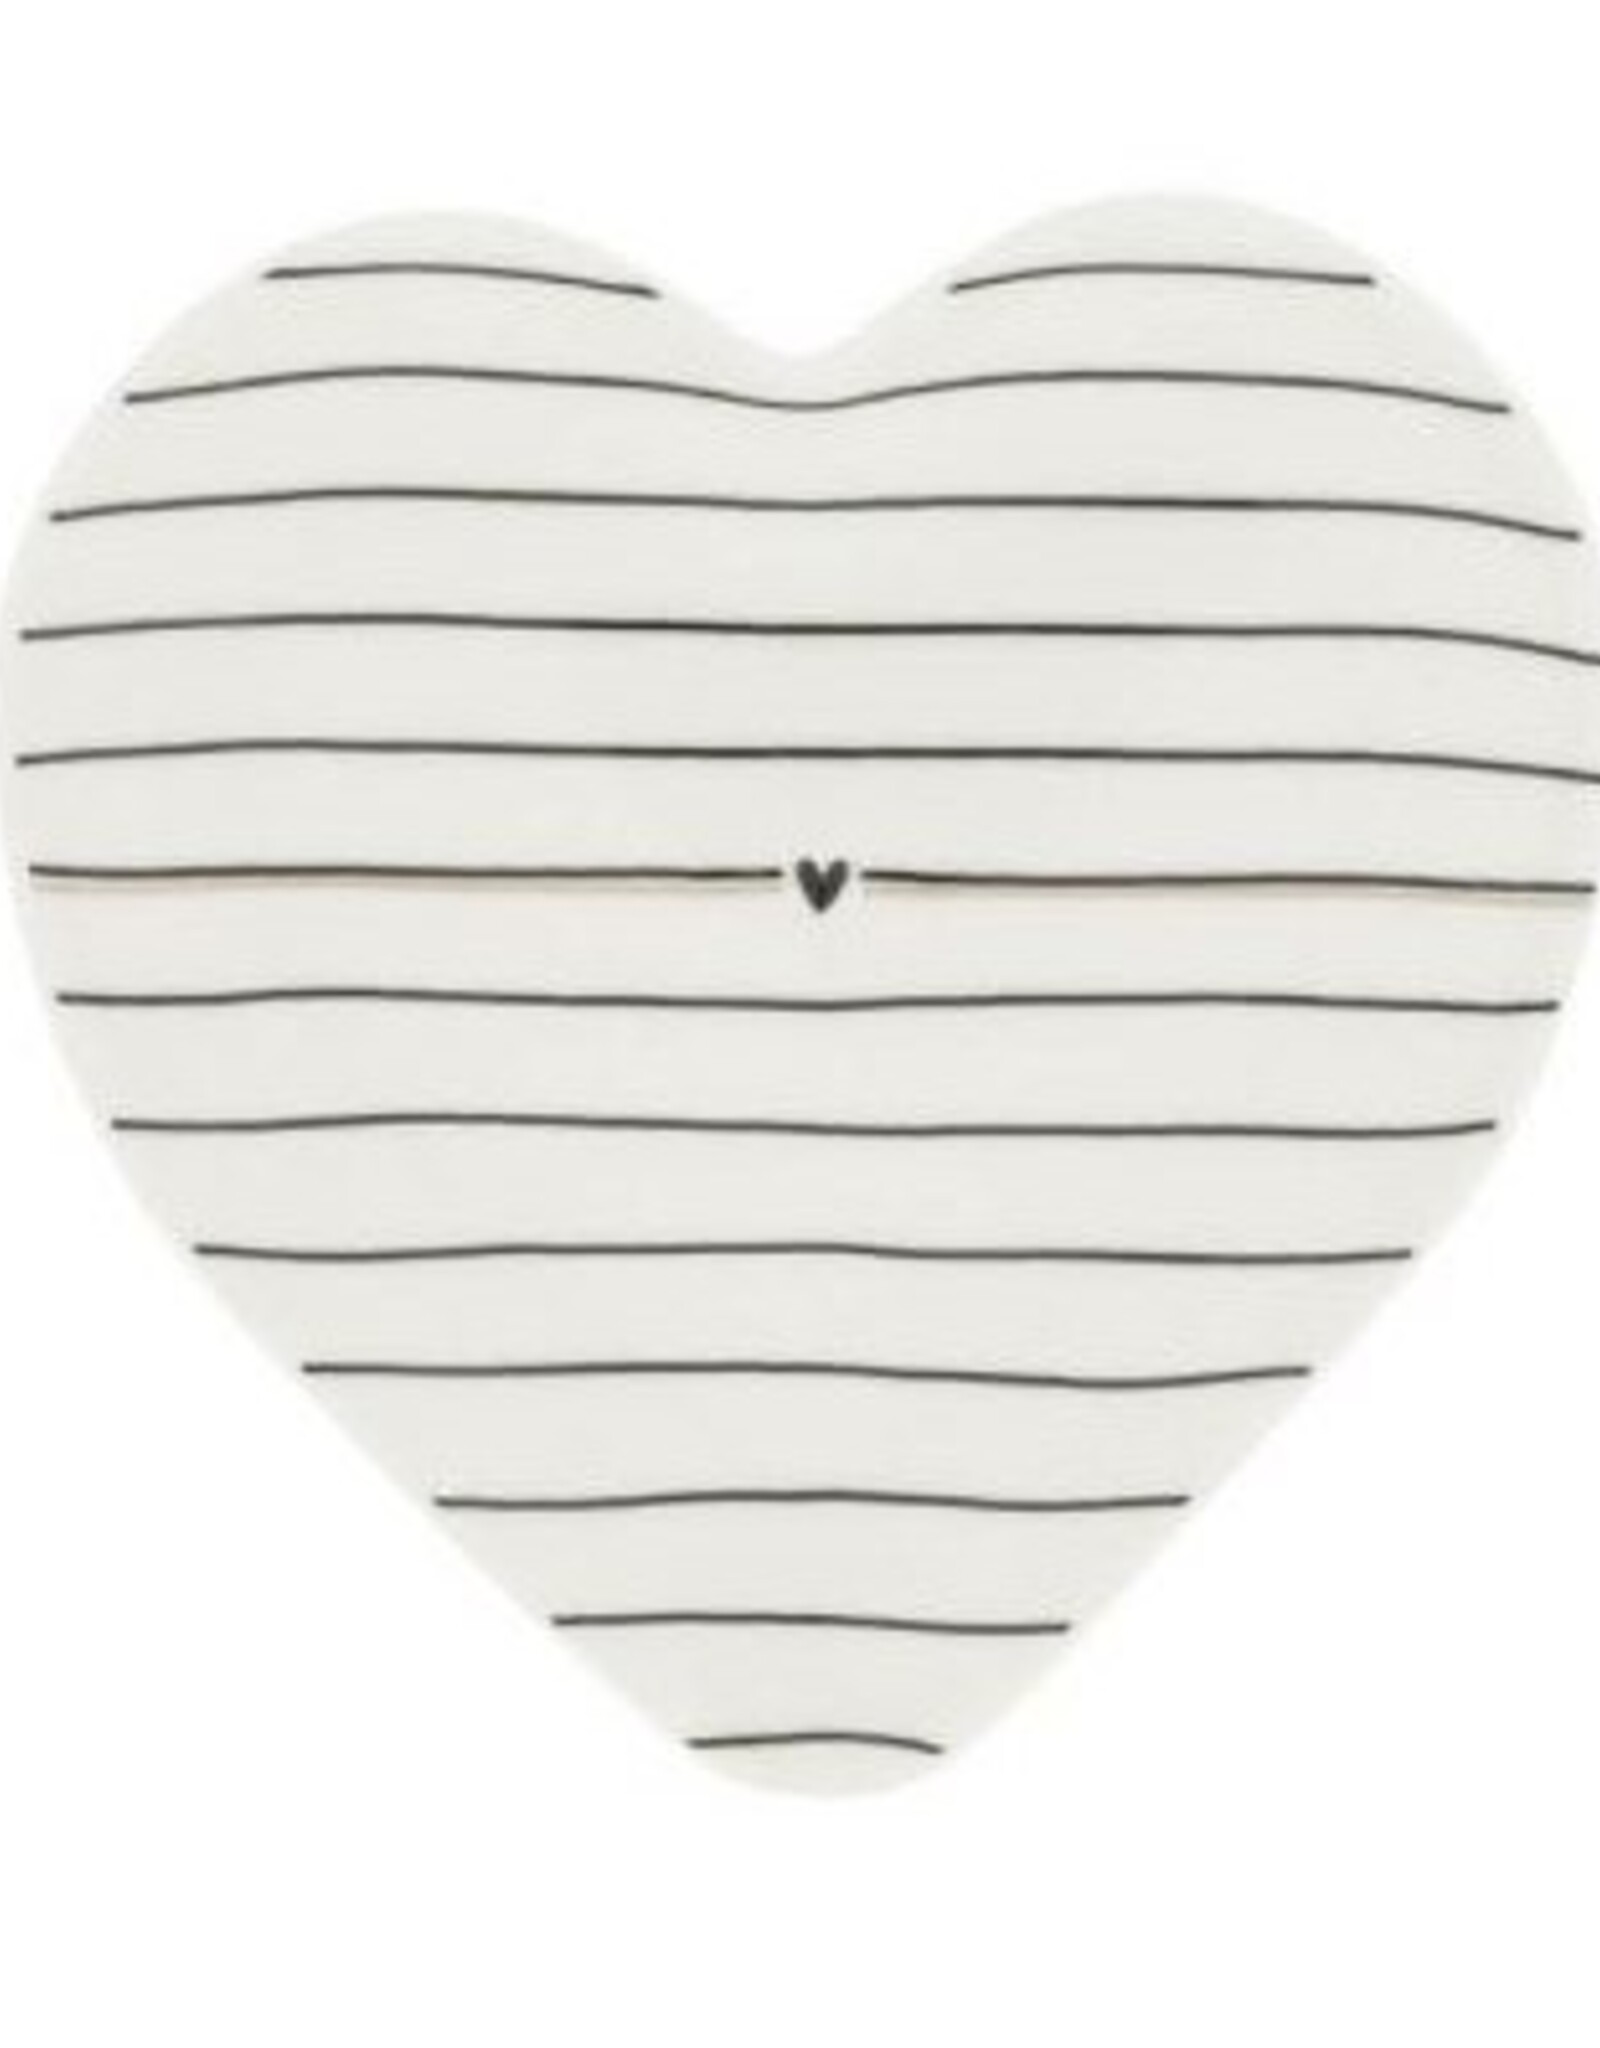 Bastion Collections Spoonholder Stripe